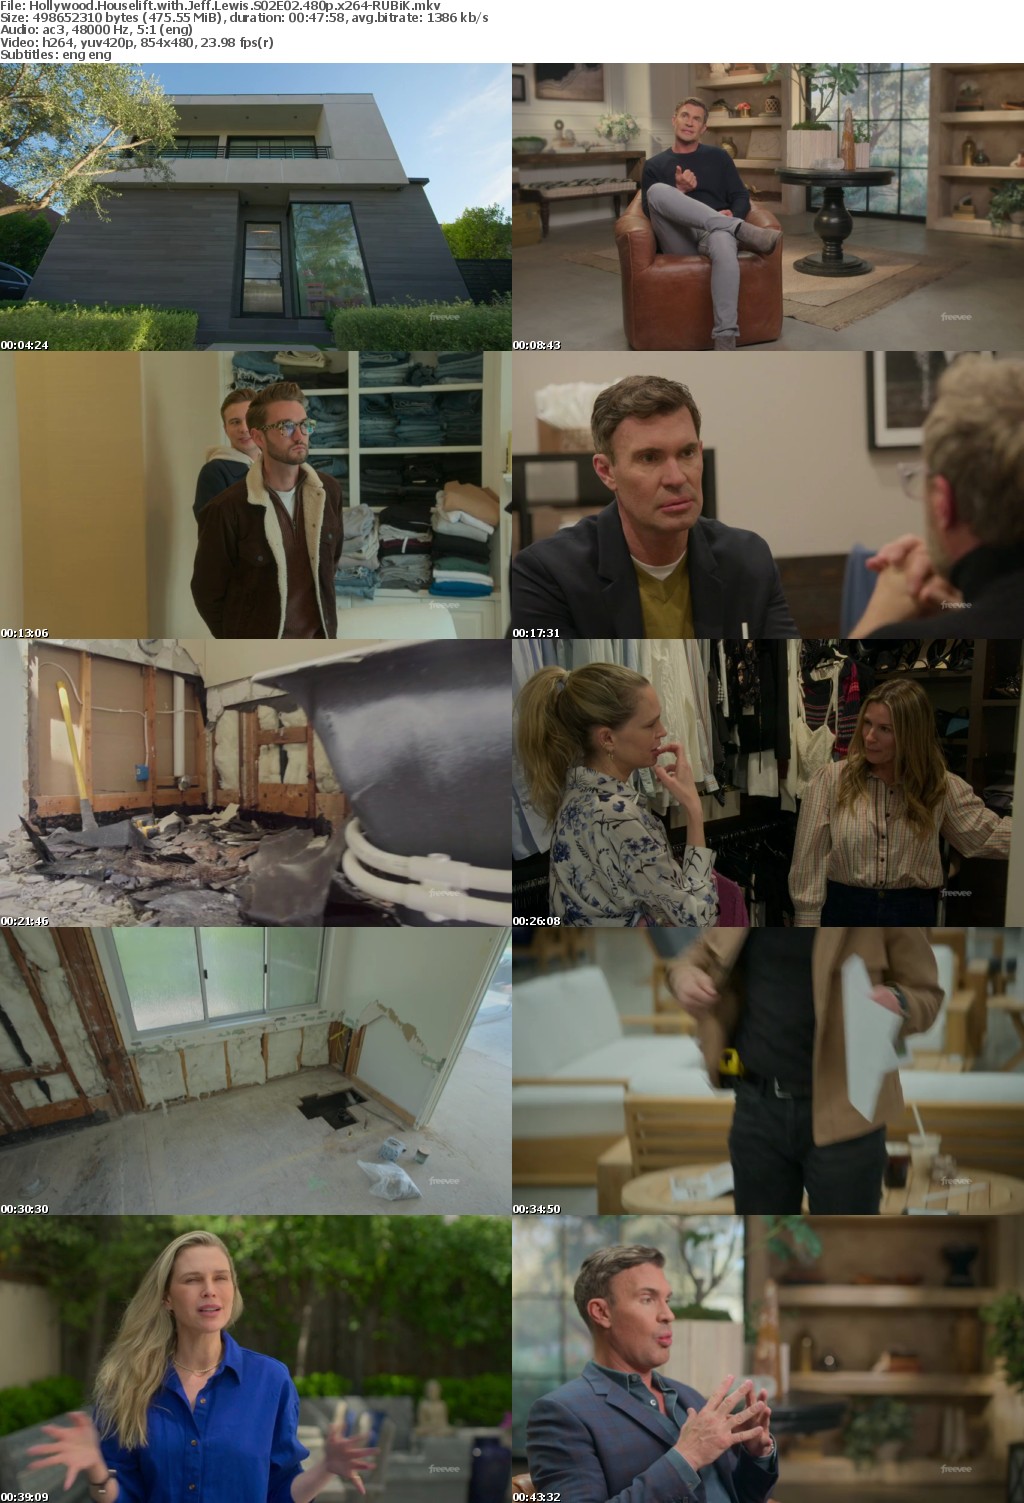 Hollywood Houselift with Jeff Lewis S02E02 480p x264-RUBiK